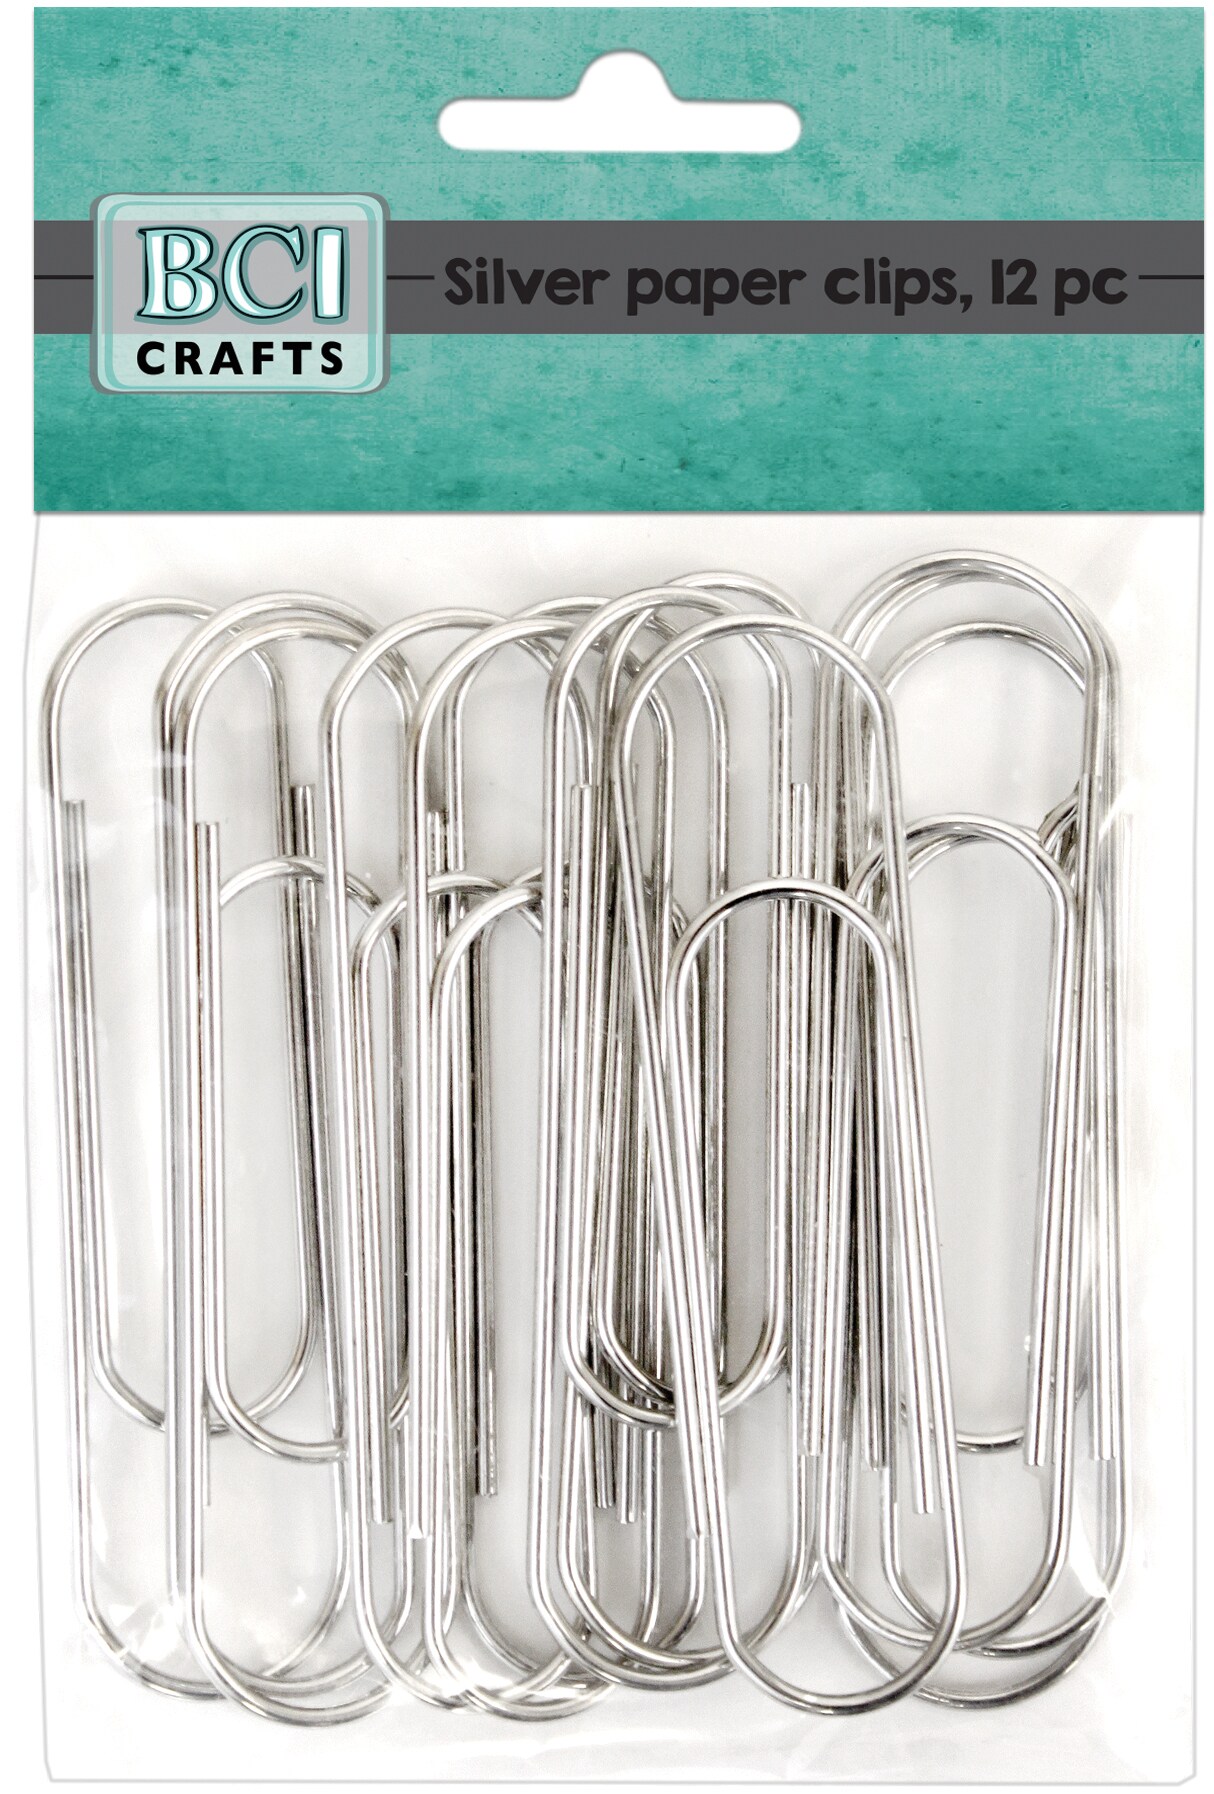 BCI Crafts Jumbo Paper Clips 12/Pkg-Silver